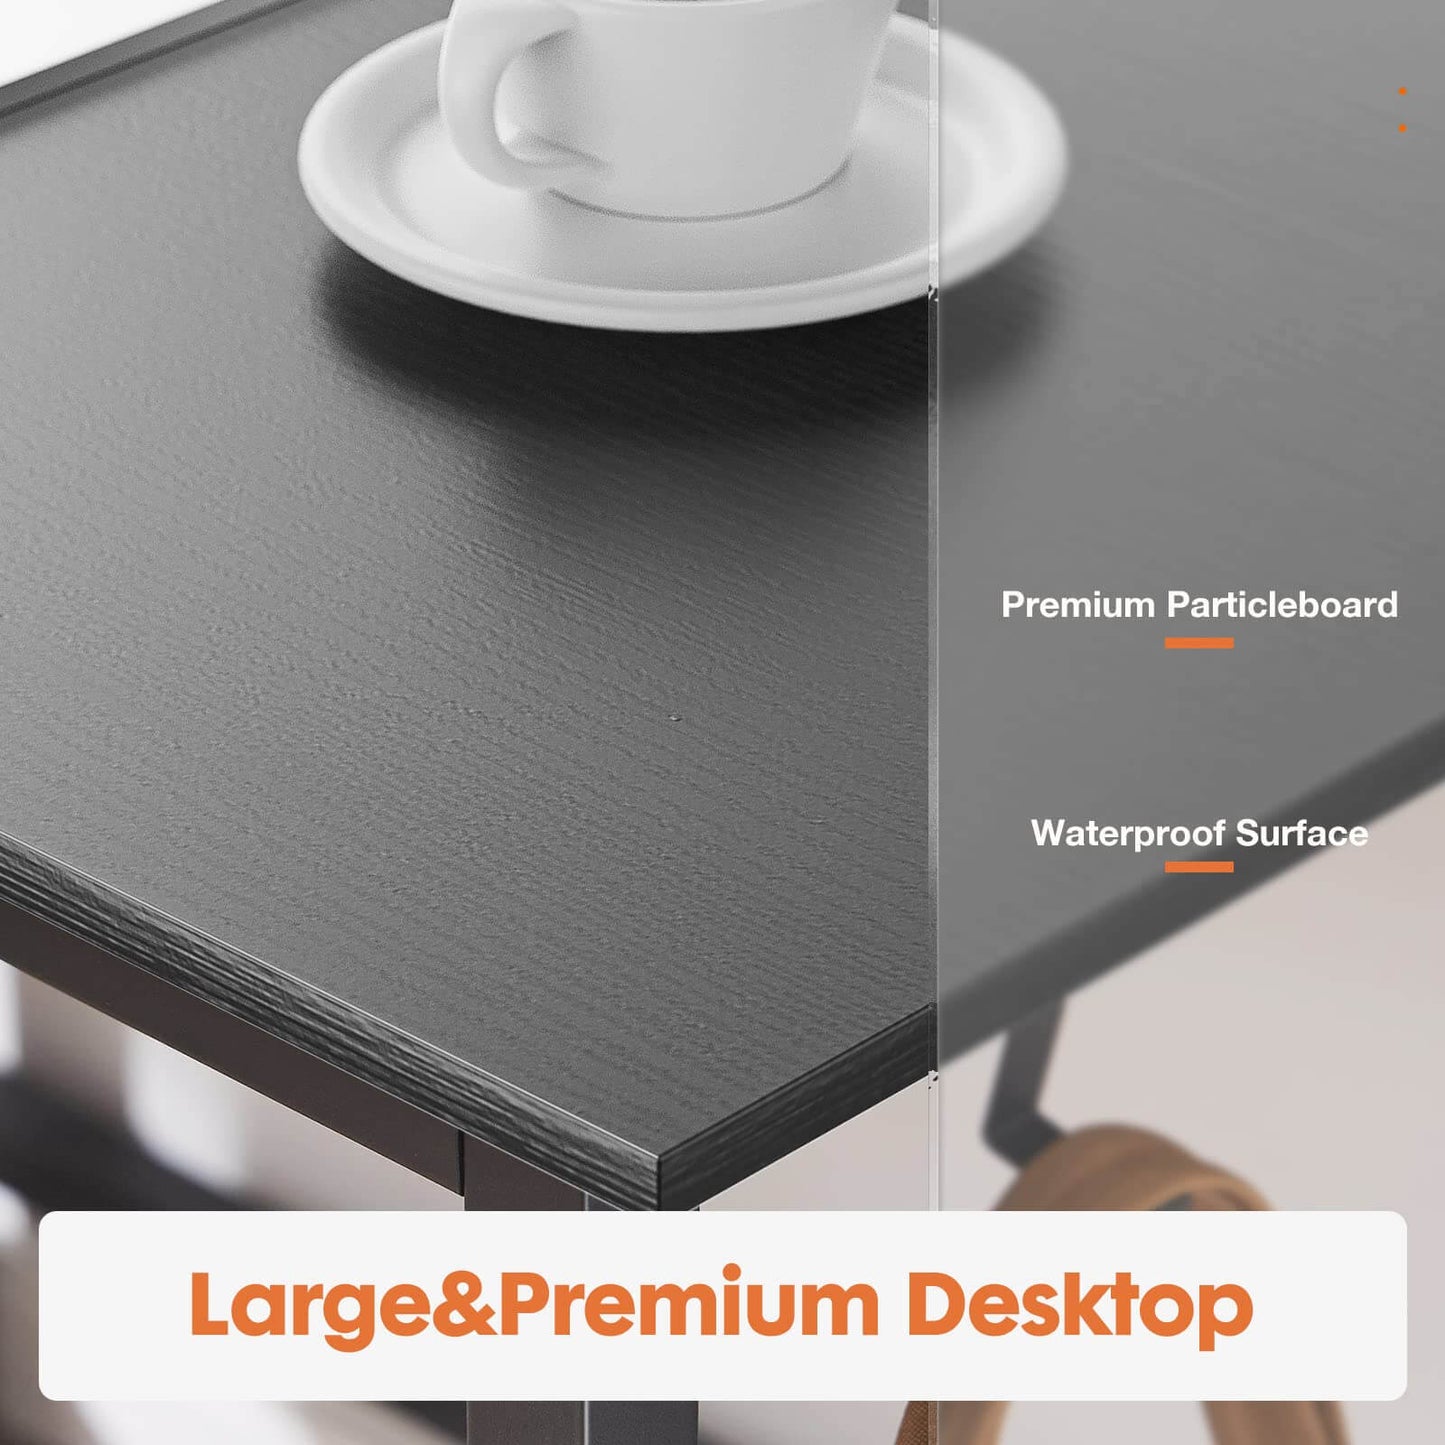 1st Choice Black Iron Office Desk: Elegance Meets Functionality